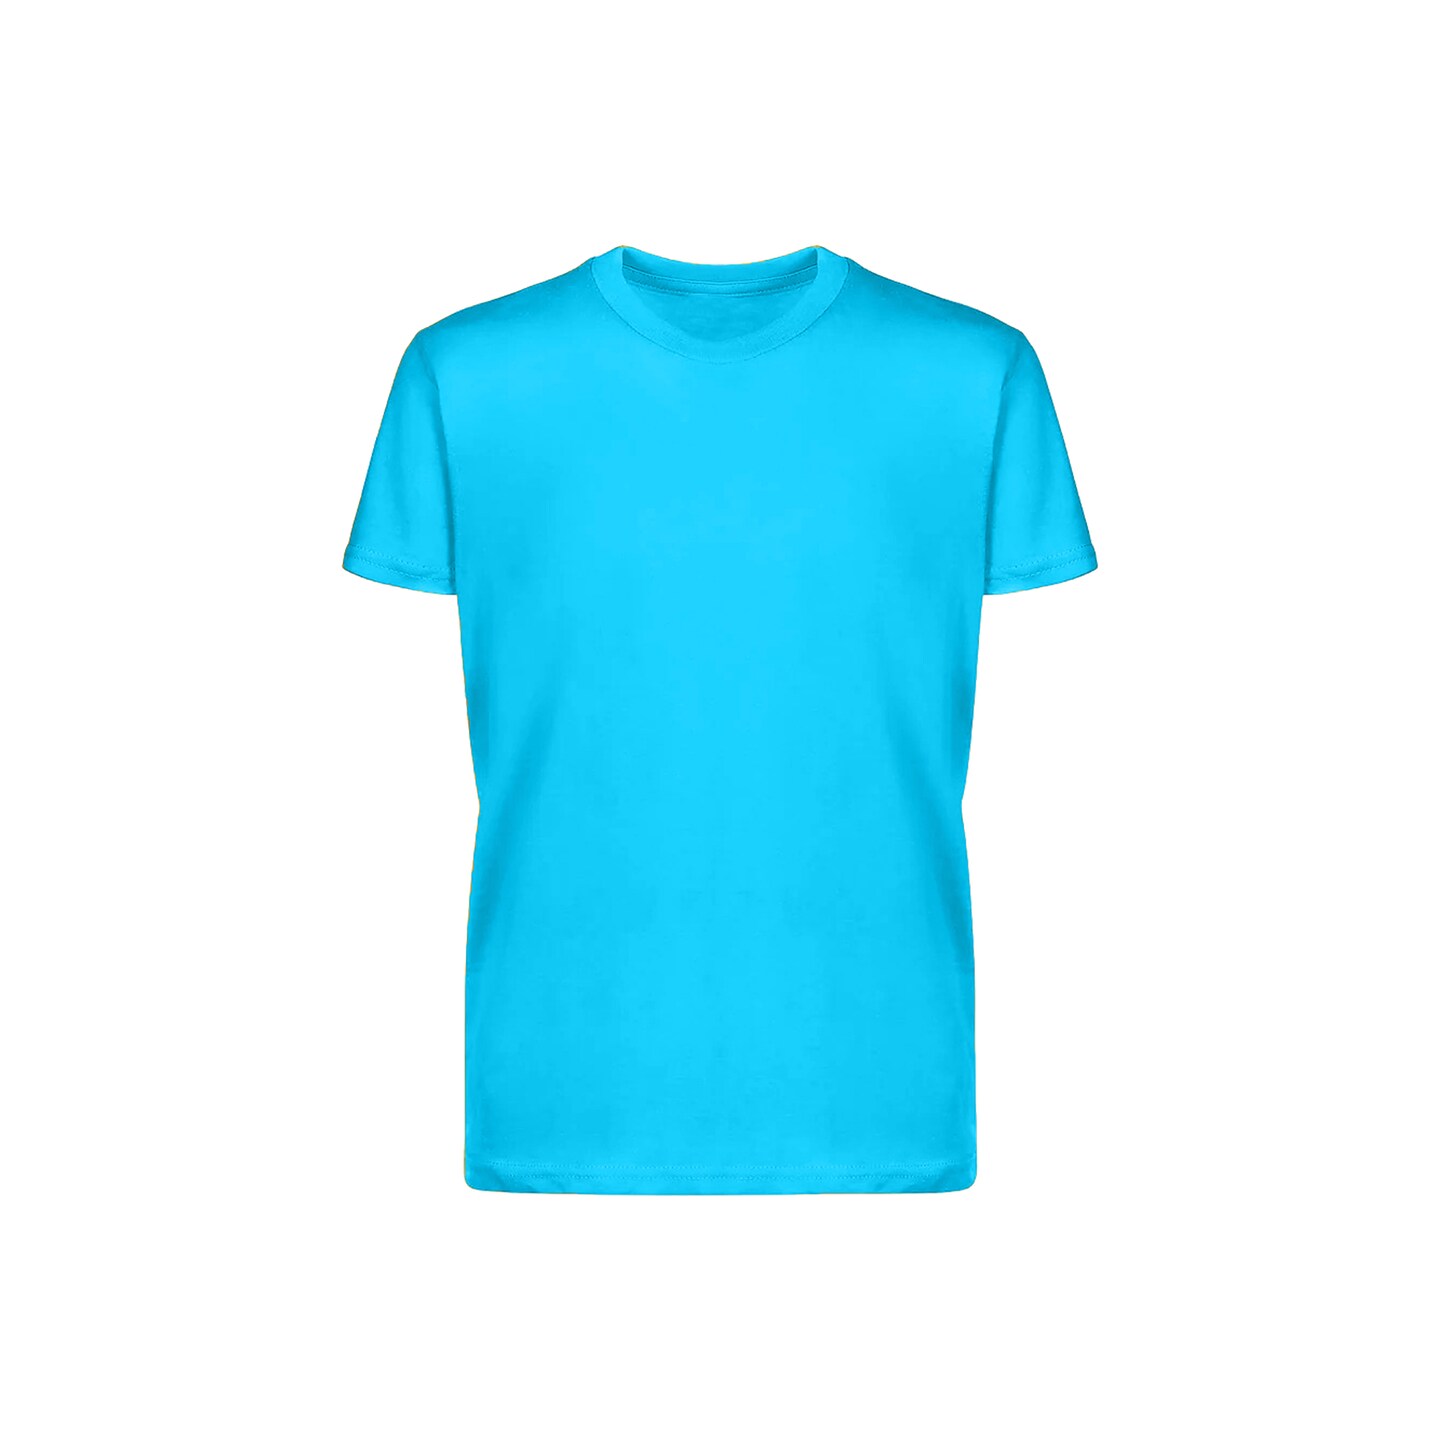 GILDAN&#xAE; -Vintage Youth Premium T-Shirts - the Comfort and Style They Deserve